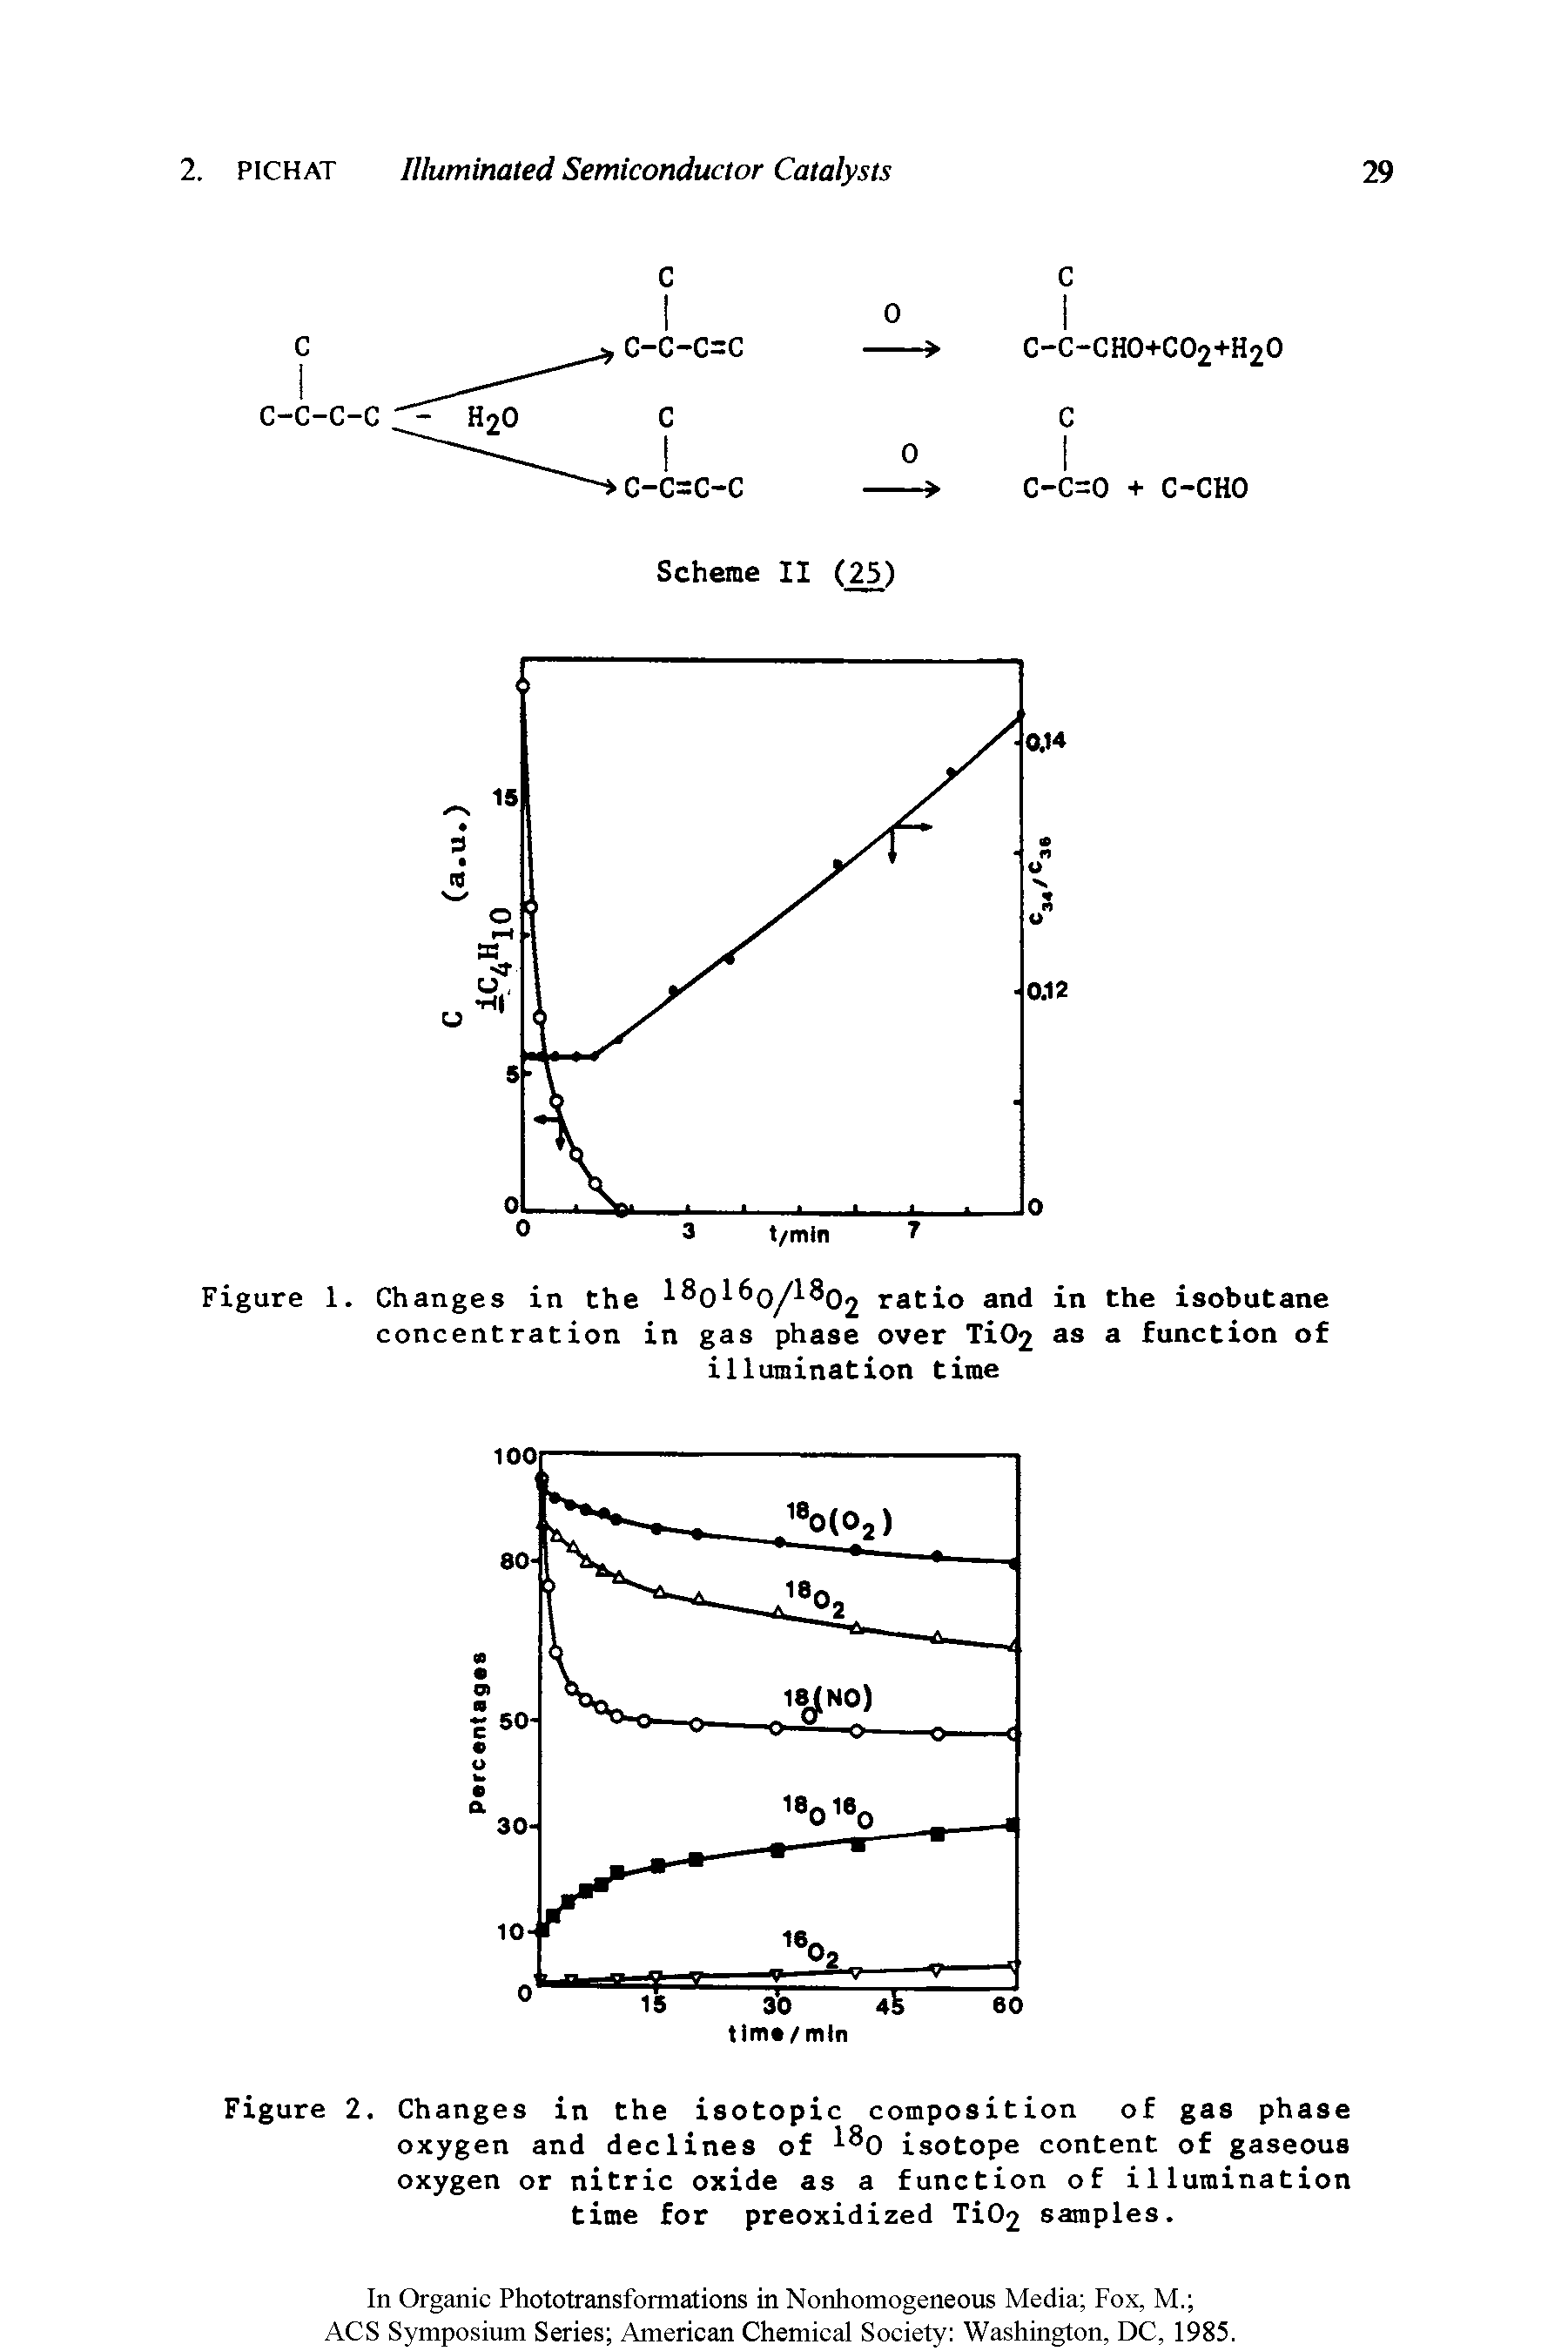 Figure 1. Changes in the 18q16o/18o2 ratio and in the isobutane concentration in gas phase over Ti02 as a function of illumination time...